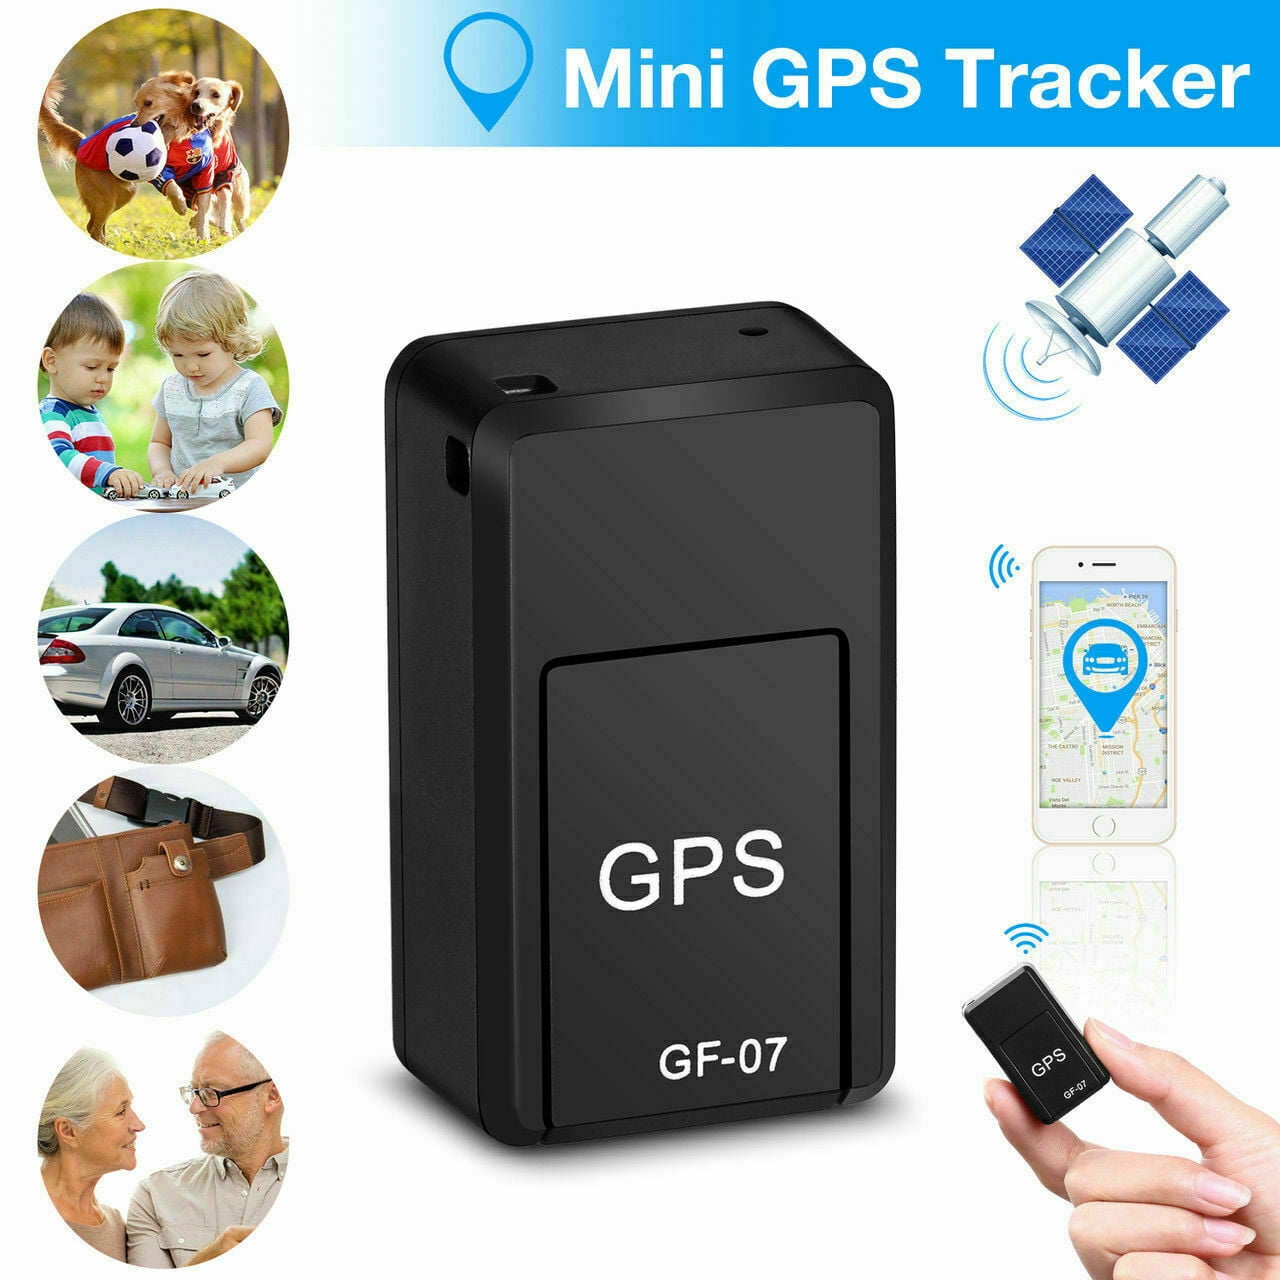 Special Needs & Elderly w/Dementia 2-Way Speakerphone AngelSense GPS Tracker for Kids w/Autism SOS Call Button School Bus Tracking Easy-to-Use App Auto-Answer 4G/LTE Nationwide Coverage 